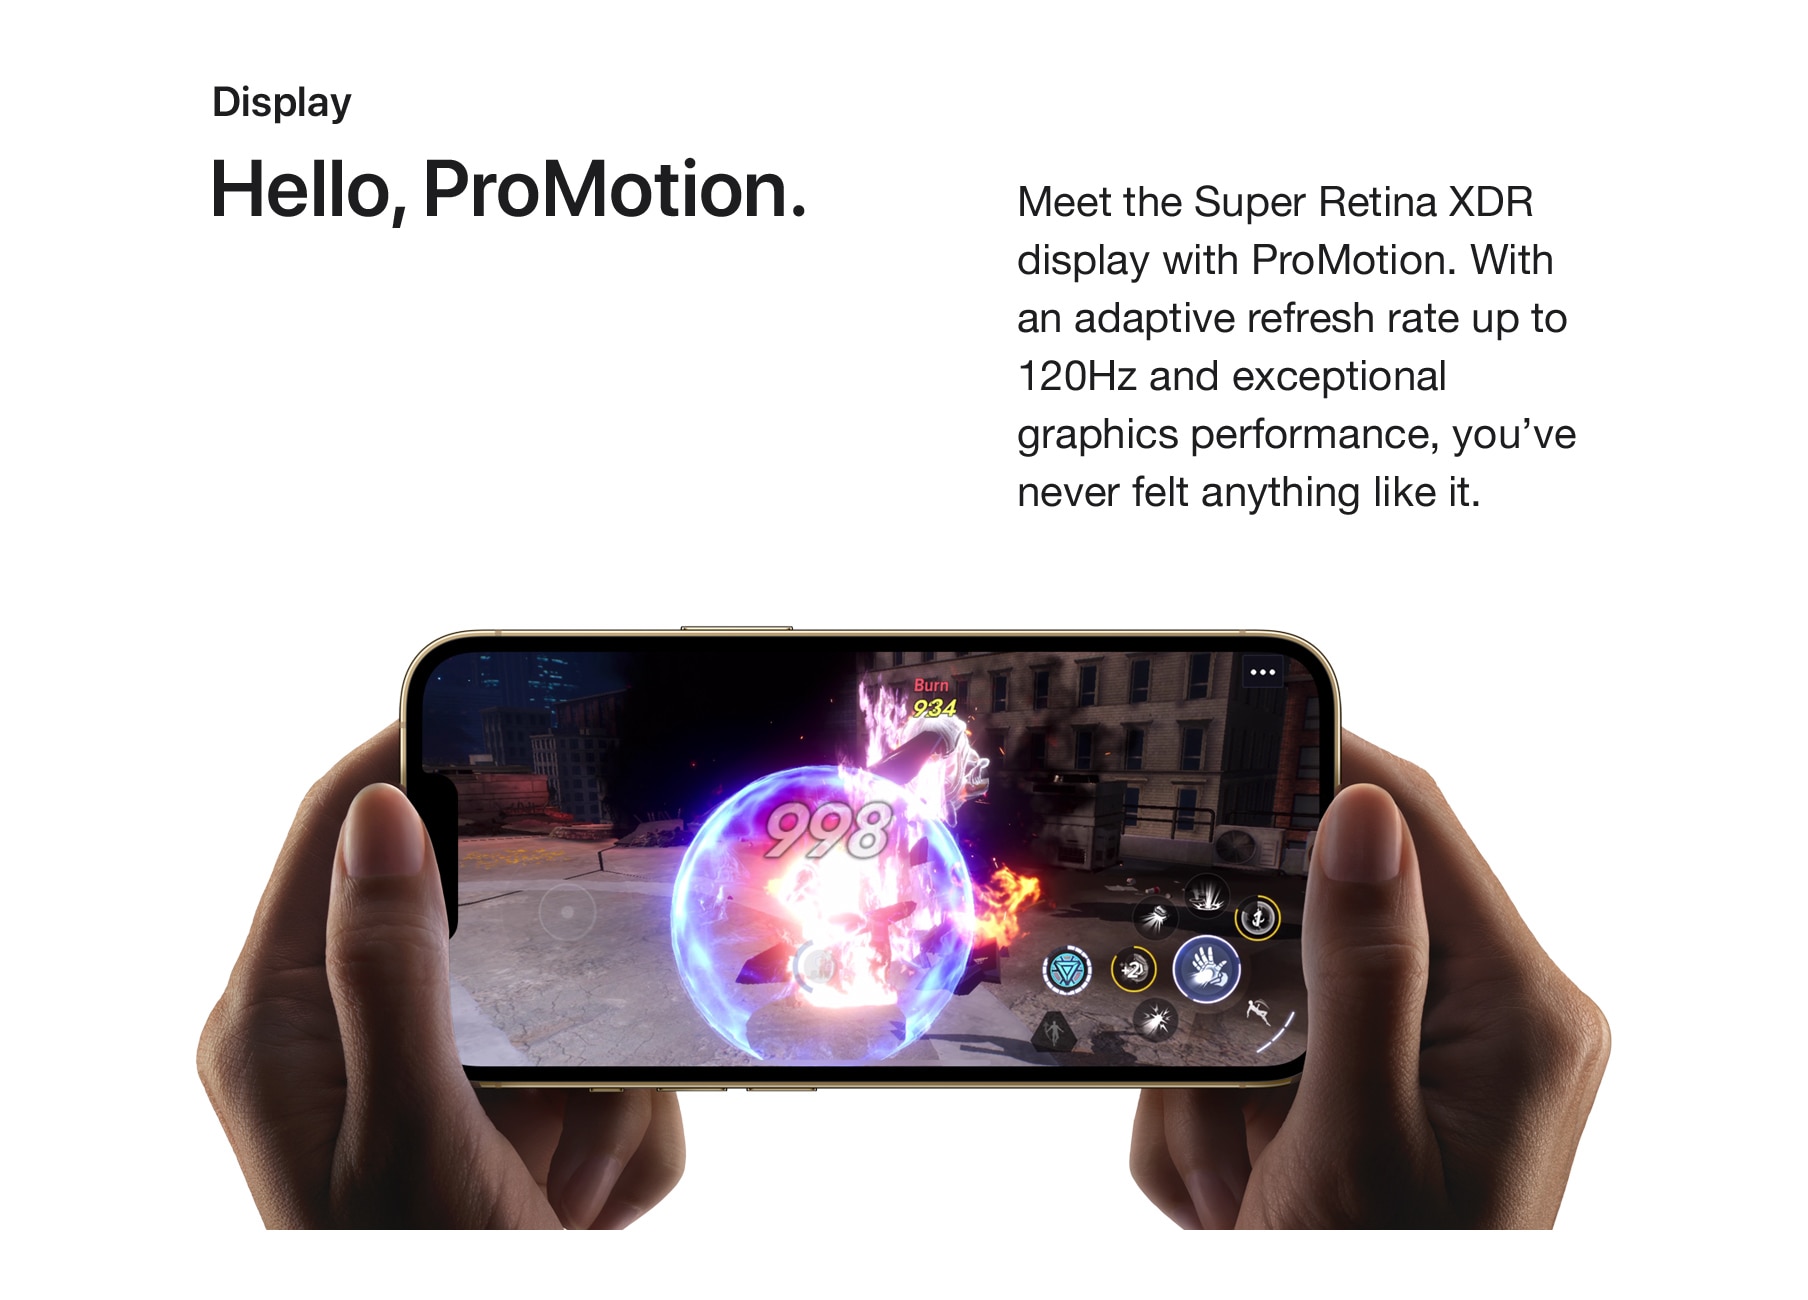 Display. Hello, Promotion. Meet the Super Retina XDR display with ProMotion. With an adaptive refresh rate up to 120Hz and exceptional graphics performance, you've never felt anything like it.